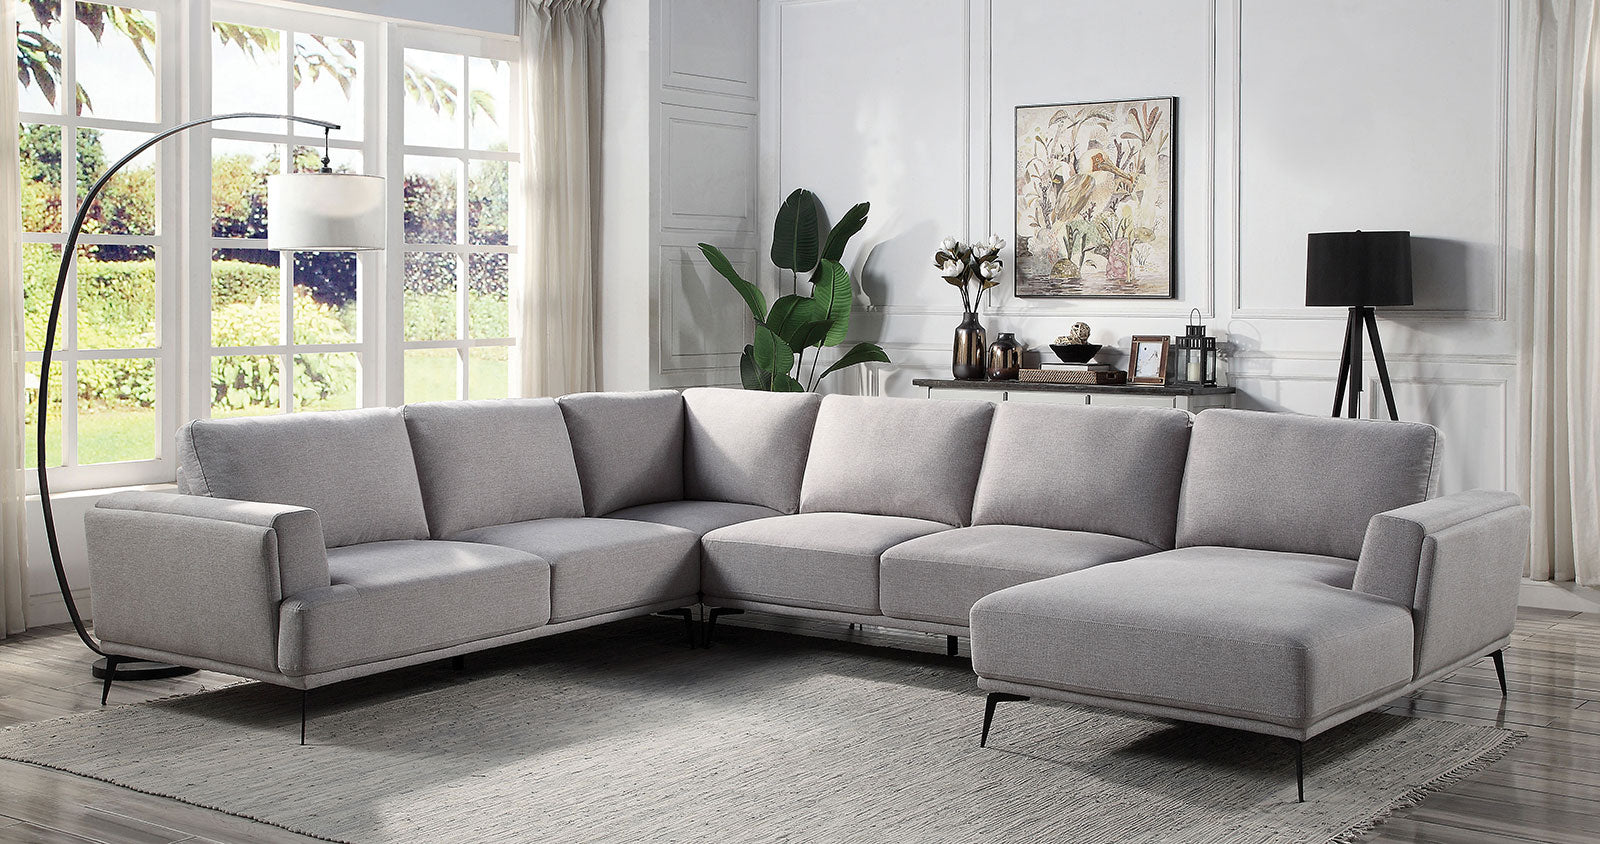 LAUFEN J-shaped Sectional, Gray image